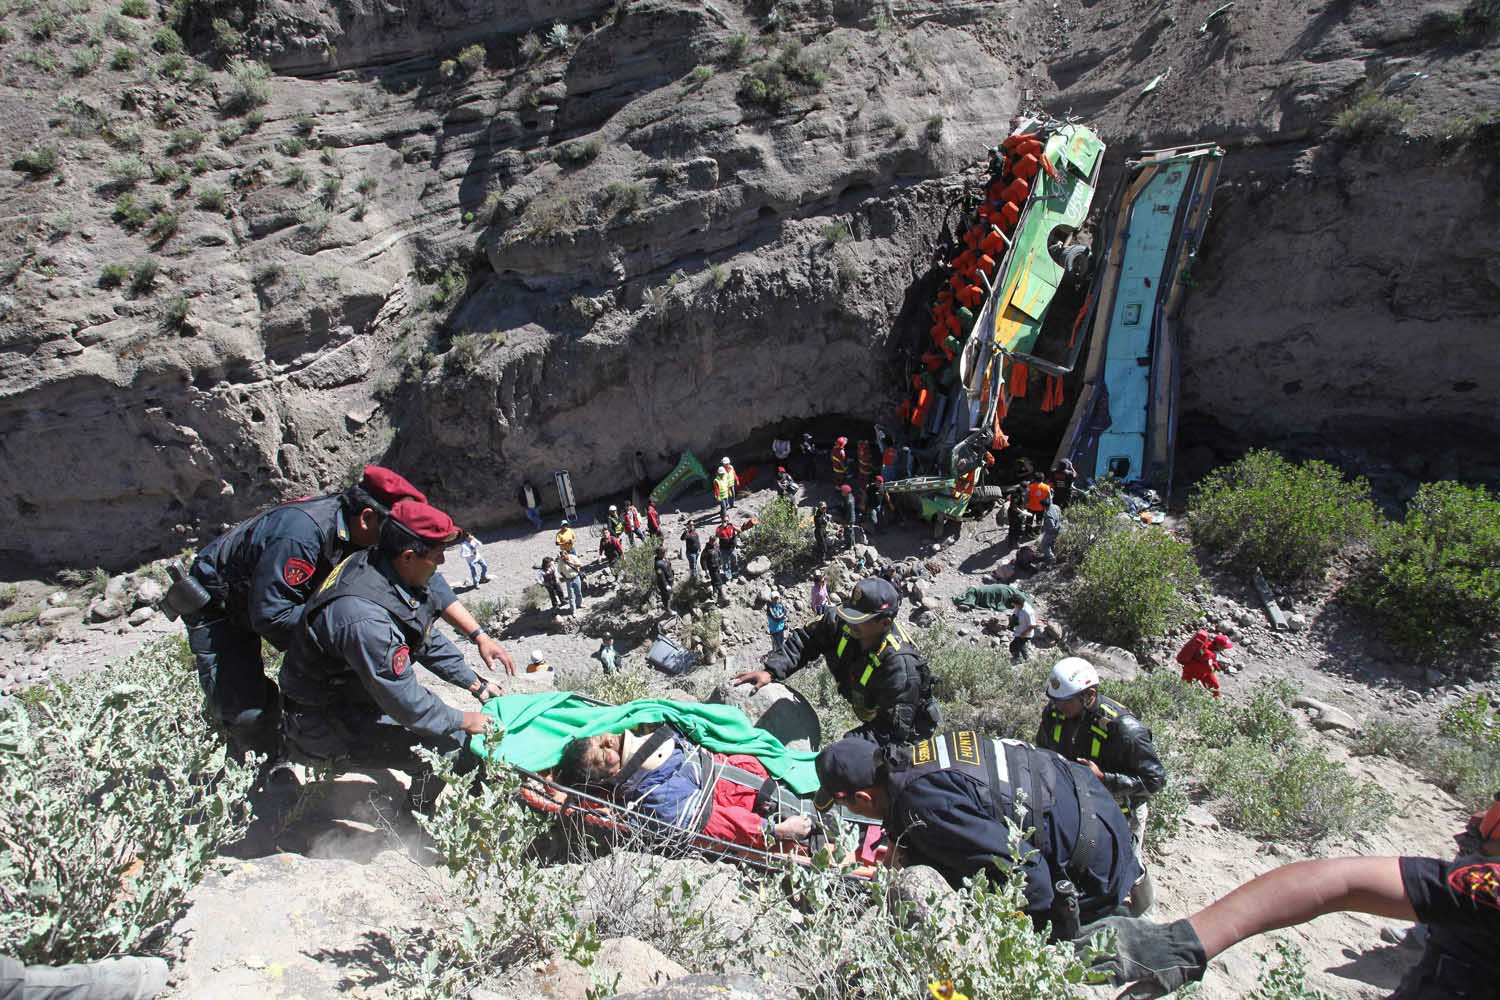 At least 24 people killed in Peruvian bus crash